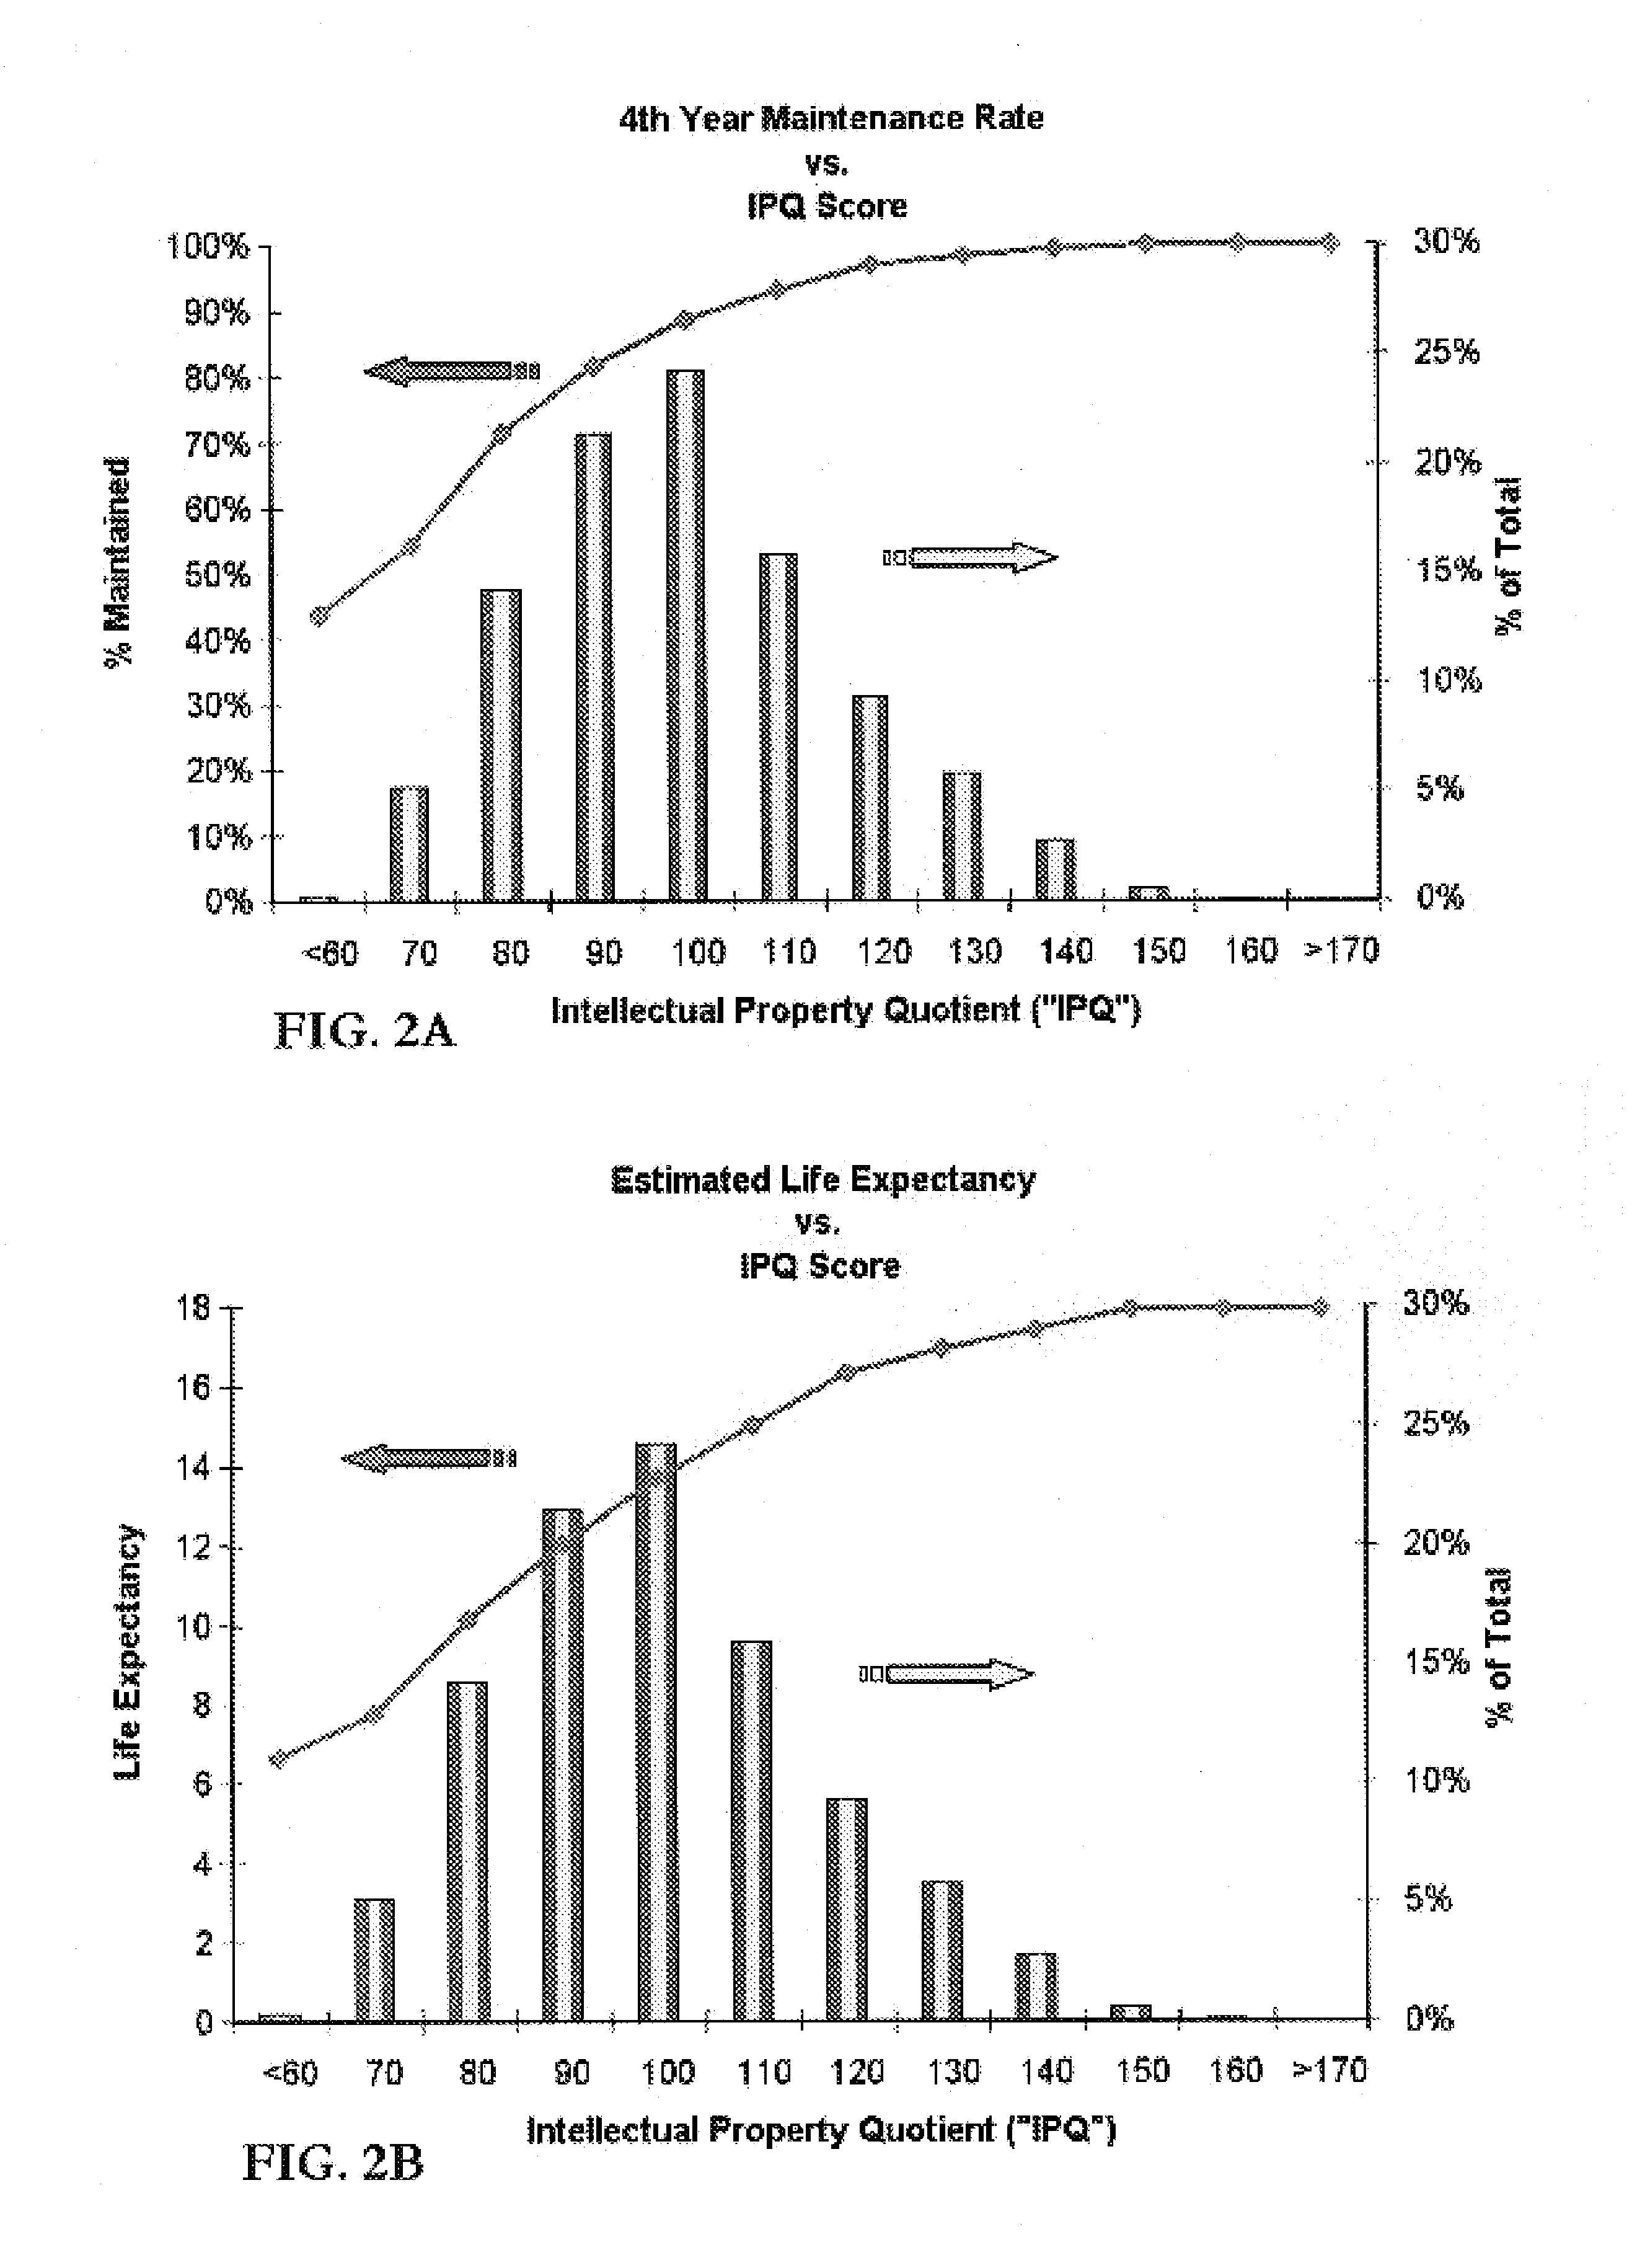 Method and system for probabilistically quantifying and visualizing relevance between two or more citationally or contextually related data objects